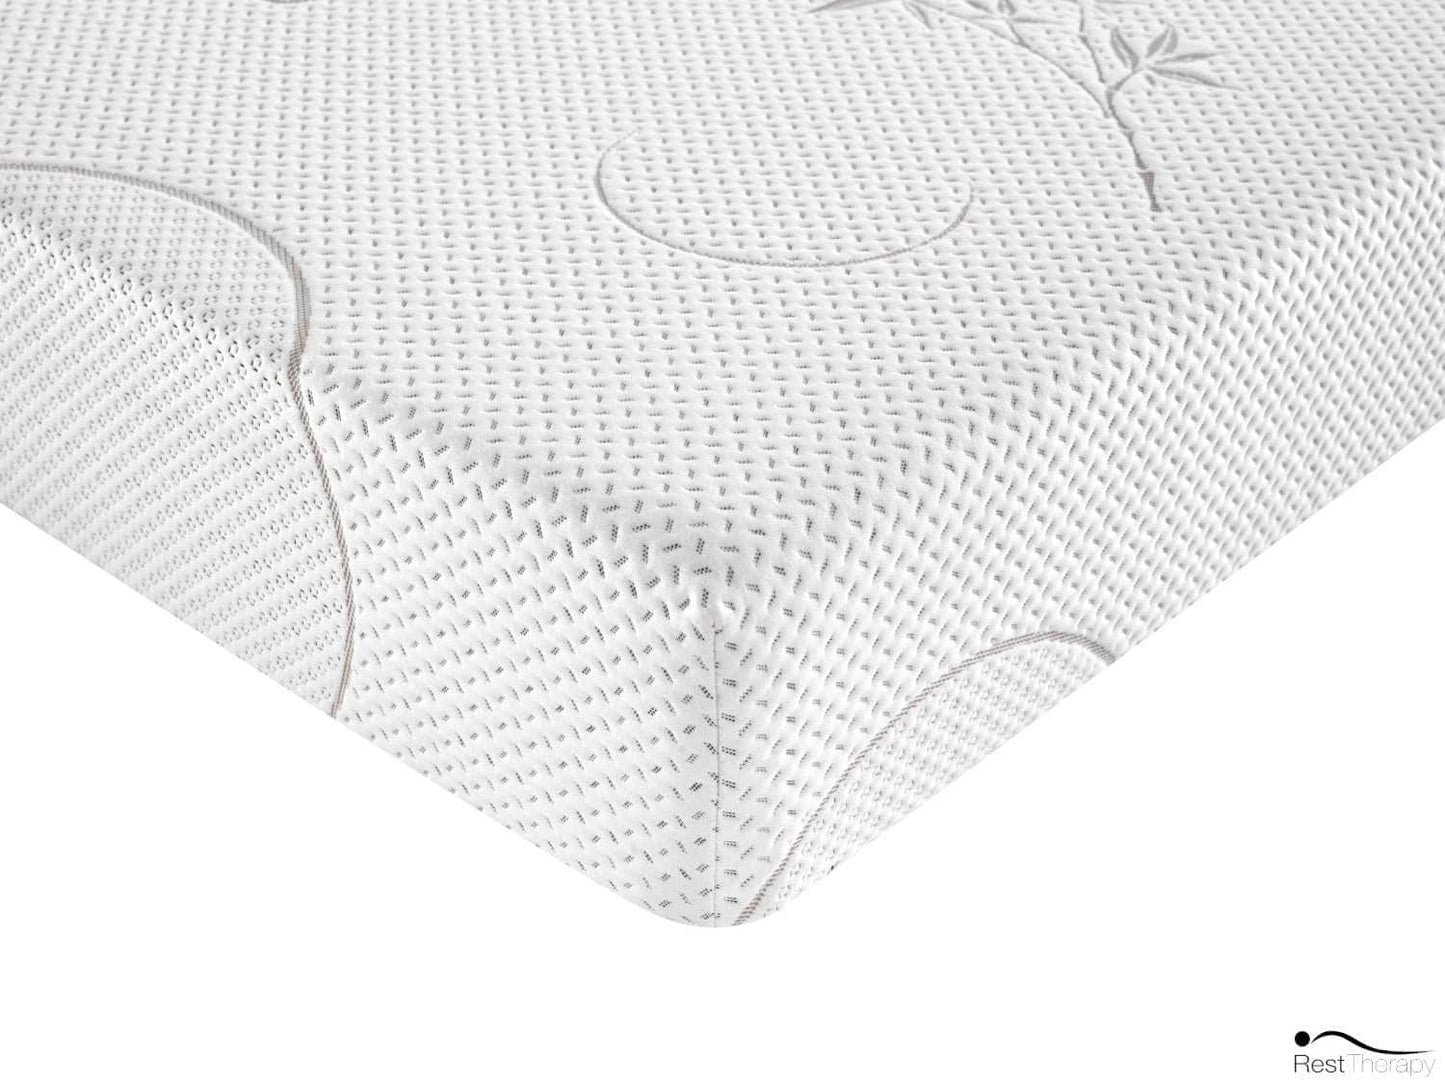 Rest Therapy Mattress 8 Inch Serenity Bamboo Memory Foam Mattress - Available in 4 Sizes